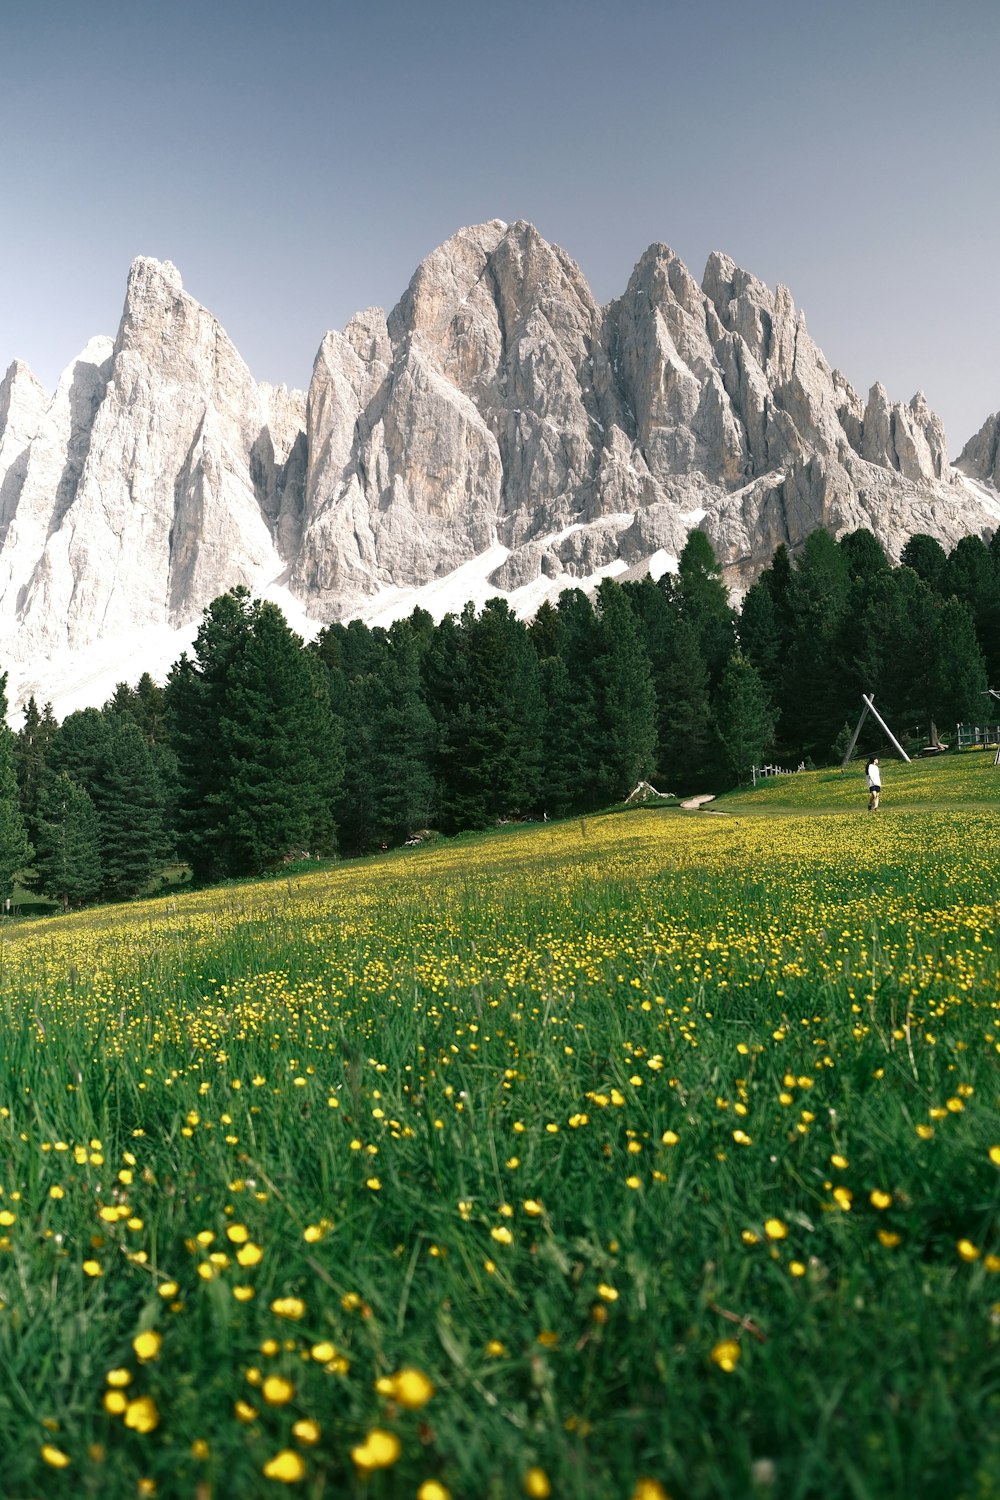 a grassy field with yellow flowers and a mountain in the background